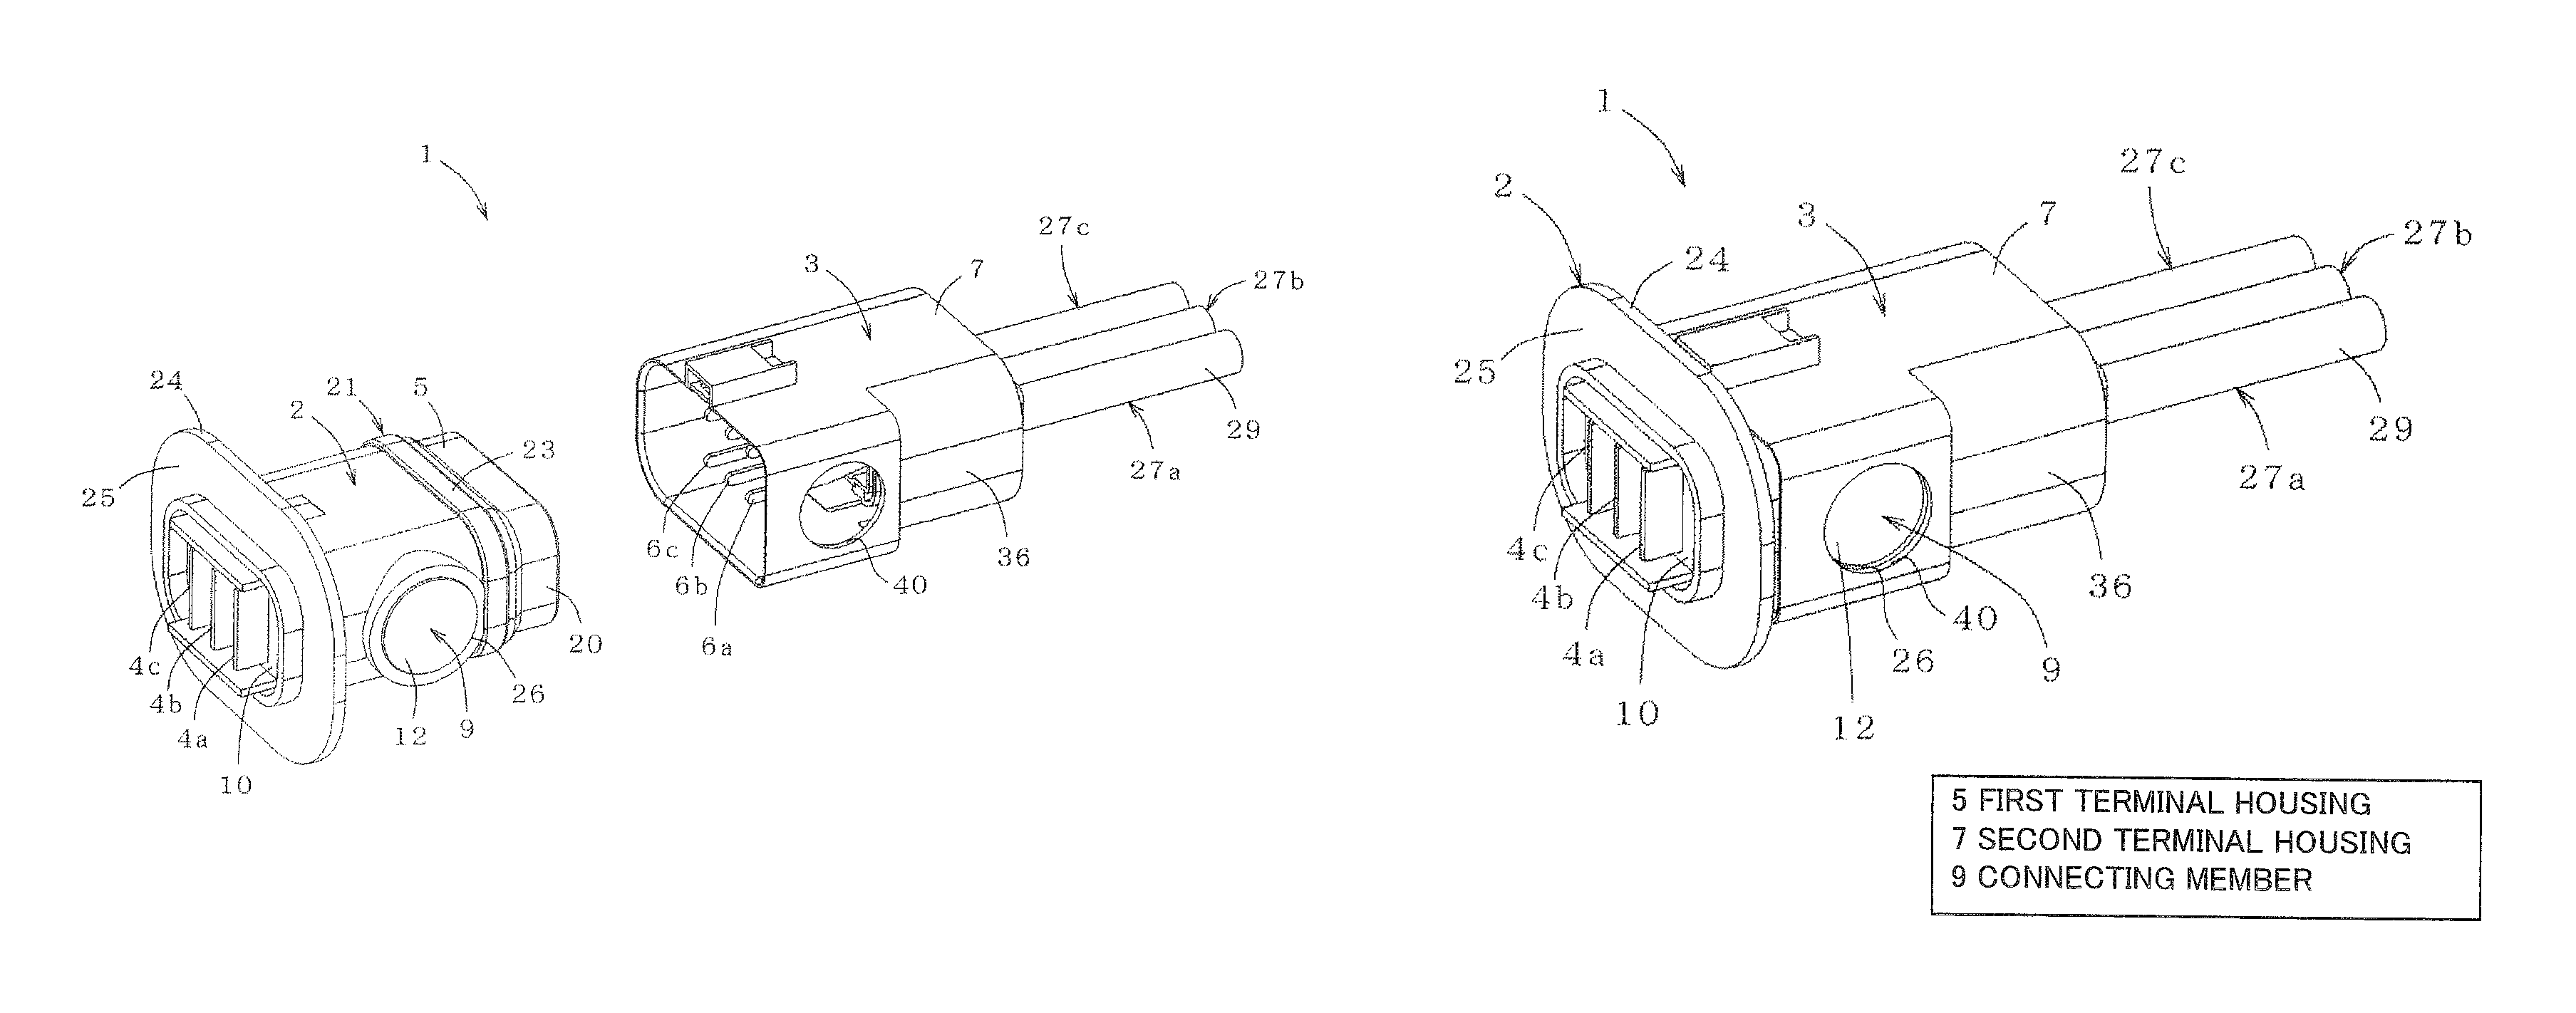 Connector with a connecting member with a screw portion penetrating the insulators and terminals of two mating terminal housings